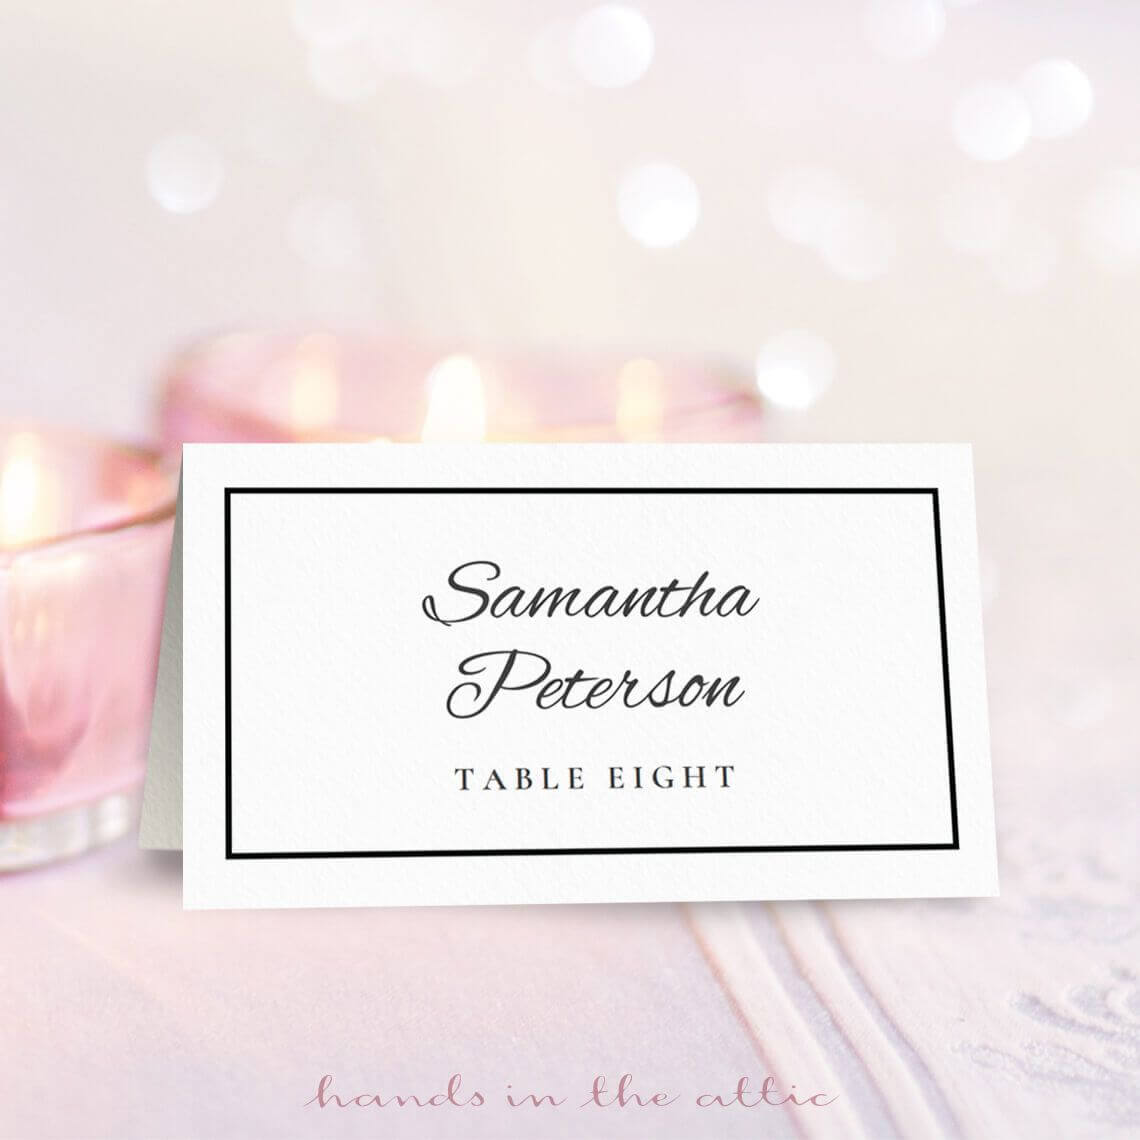 Print Out These 8 Free Place Card Templates For Your Wedding Within Place Card Setting Template